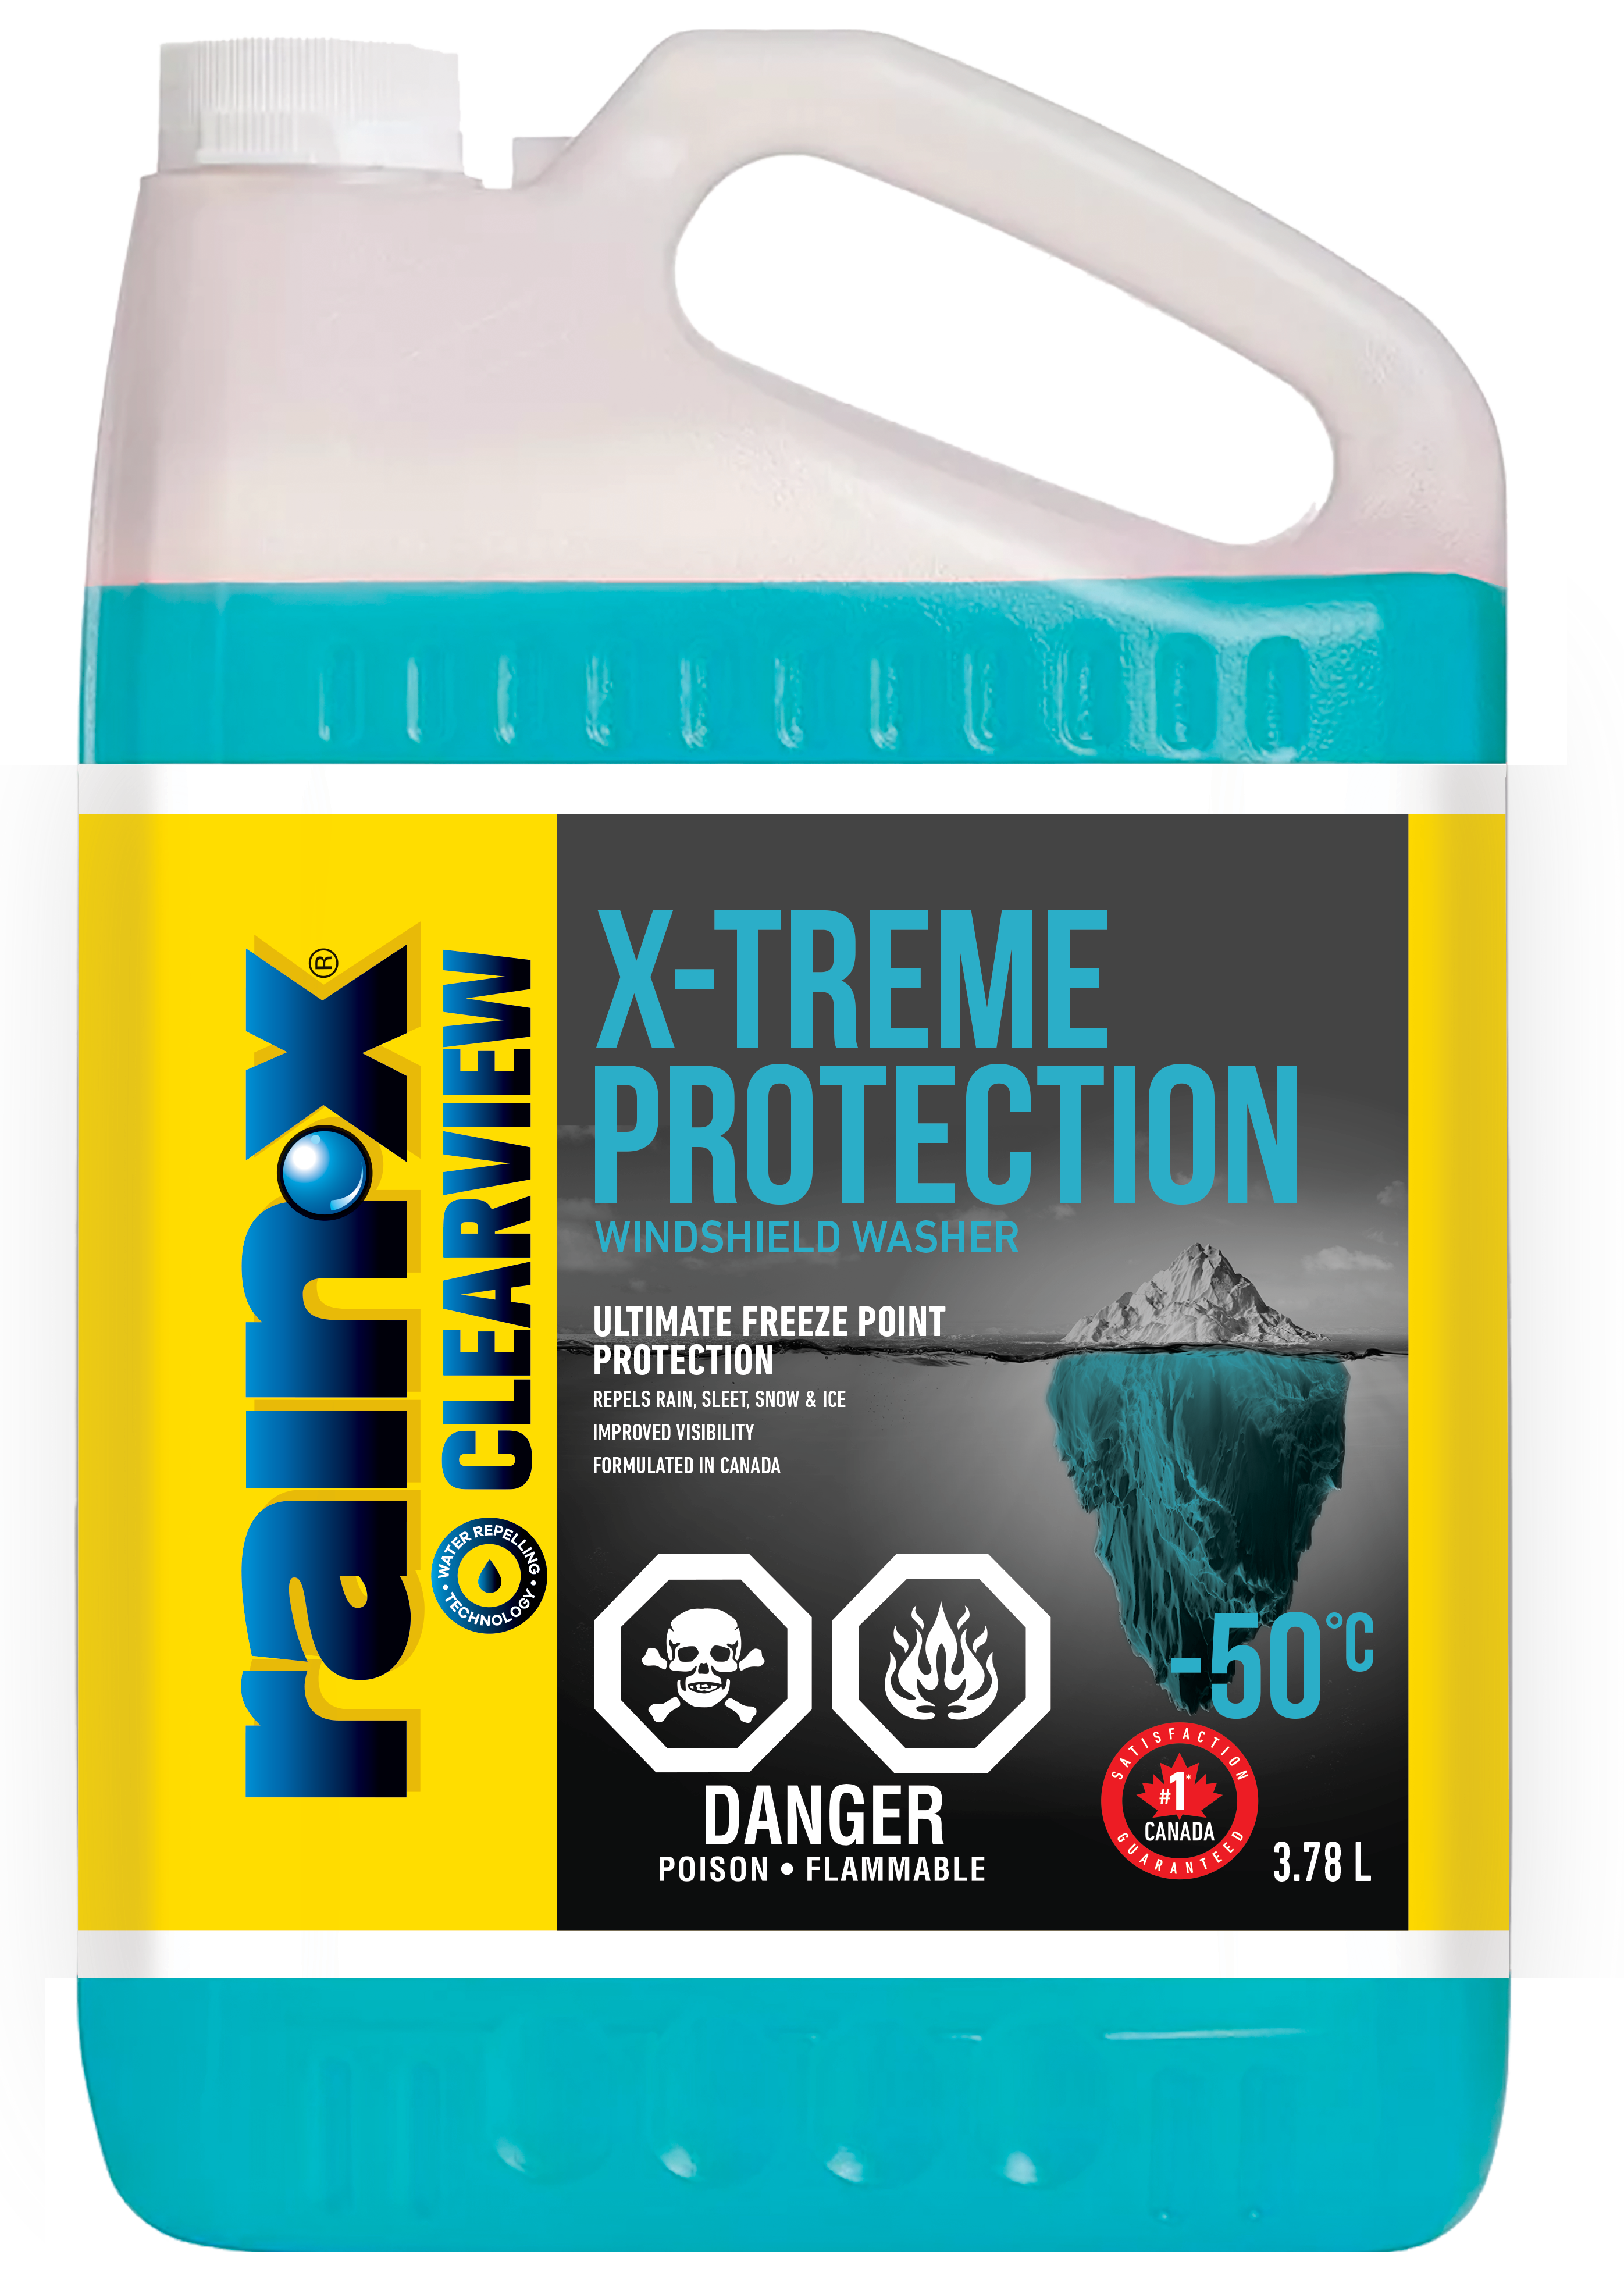 X-treme Protection - Windshield Washer Fluid - Rain-X Clearview